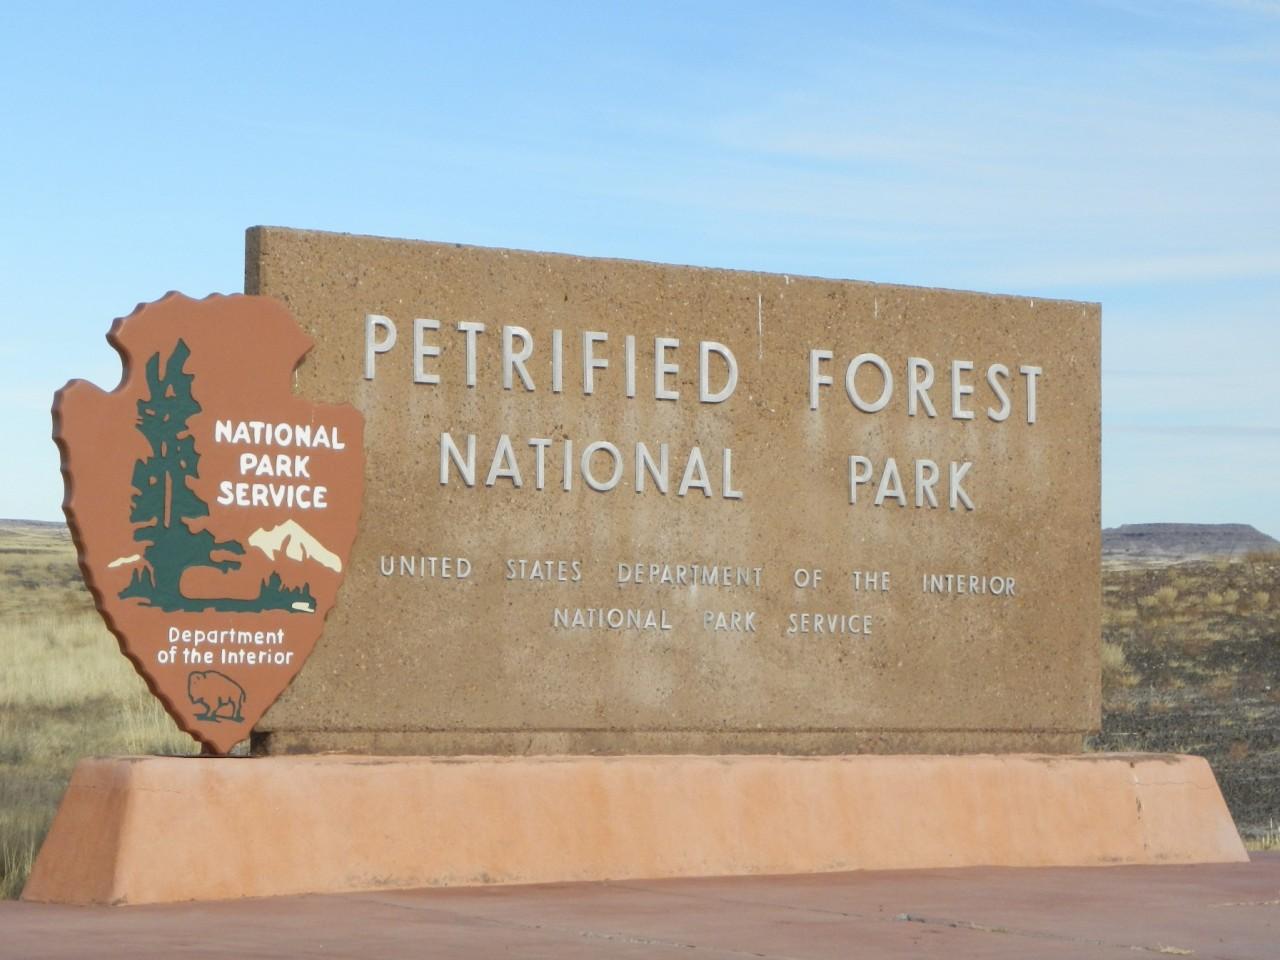 Southern Entrance to the Petrified Forest